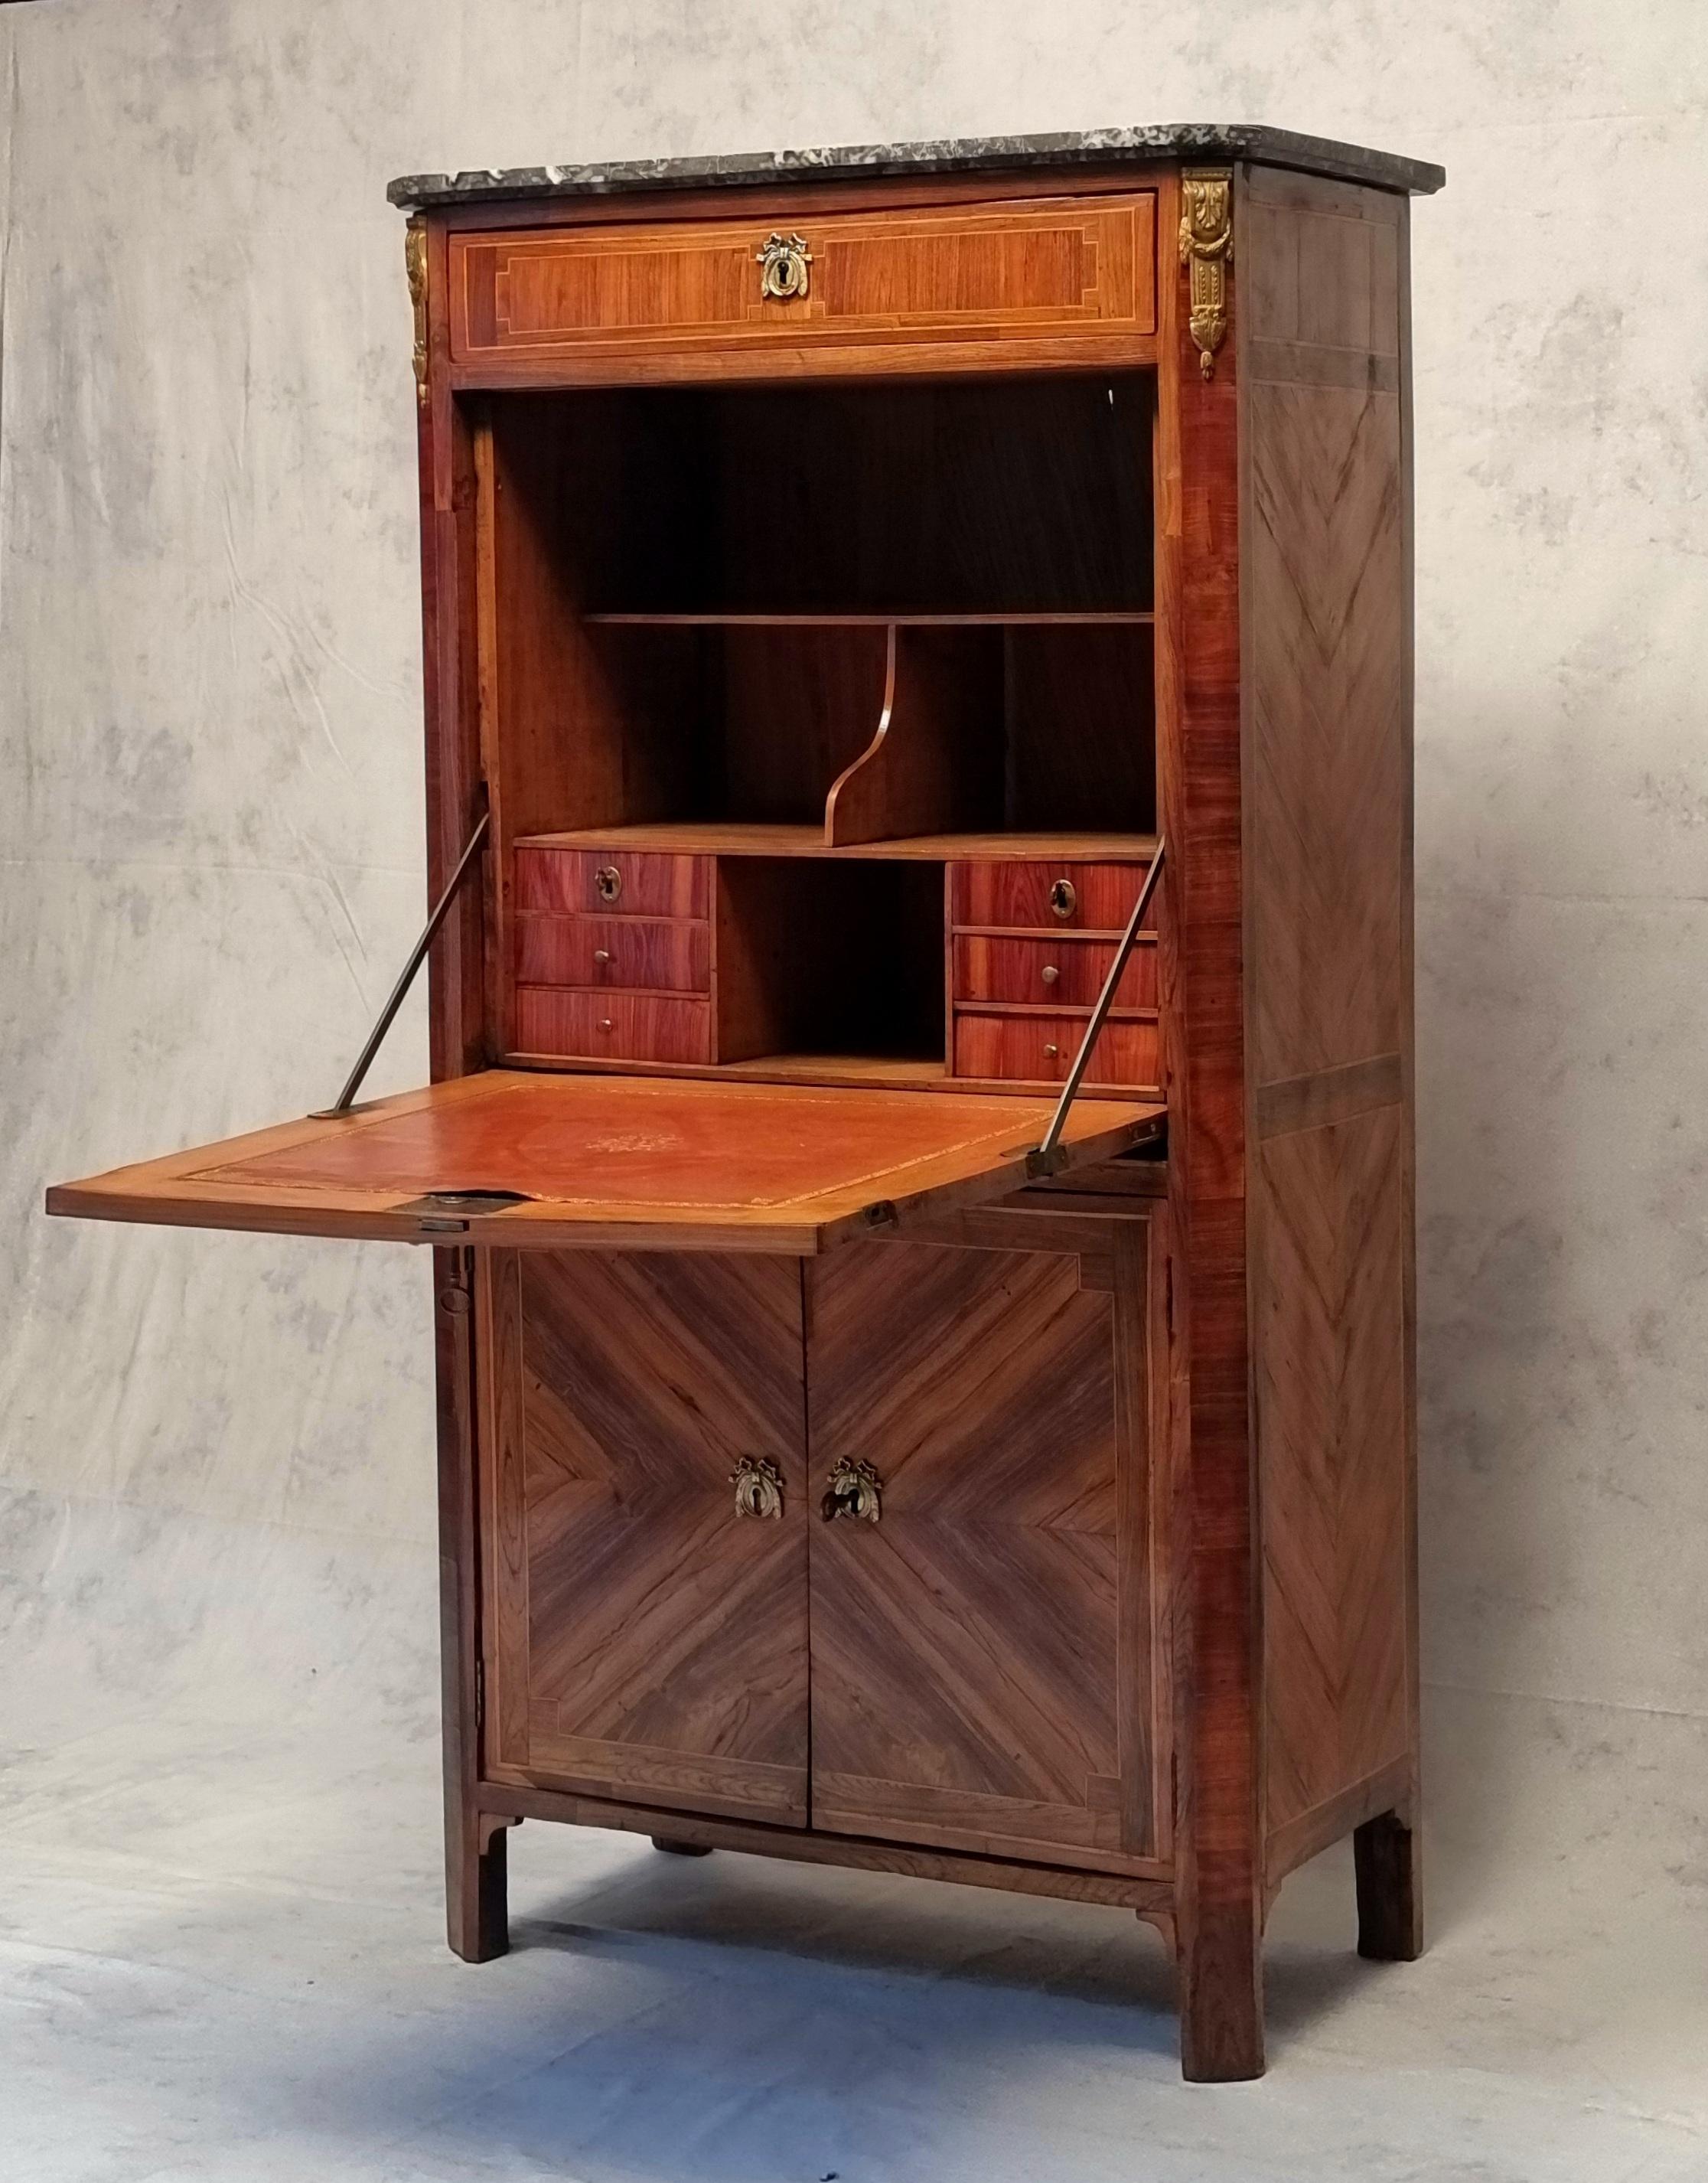 Magnificent secretaire with flap from the Louis XVI period from the end of the 18th century. It has a magnificent curling work (marquetry) giving a beautiful cross appearance on the rosewood front and rosewood frame. The flap discovers a box made up